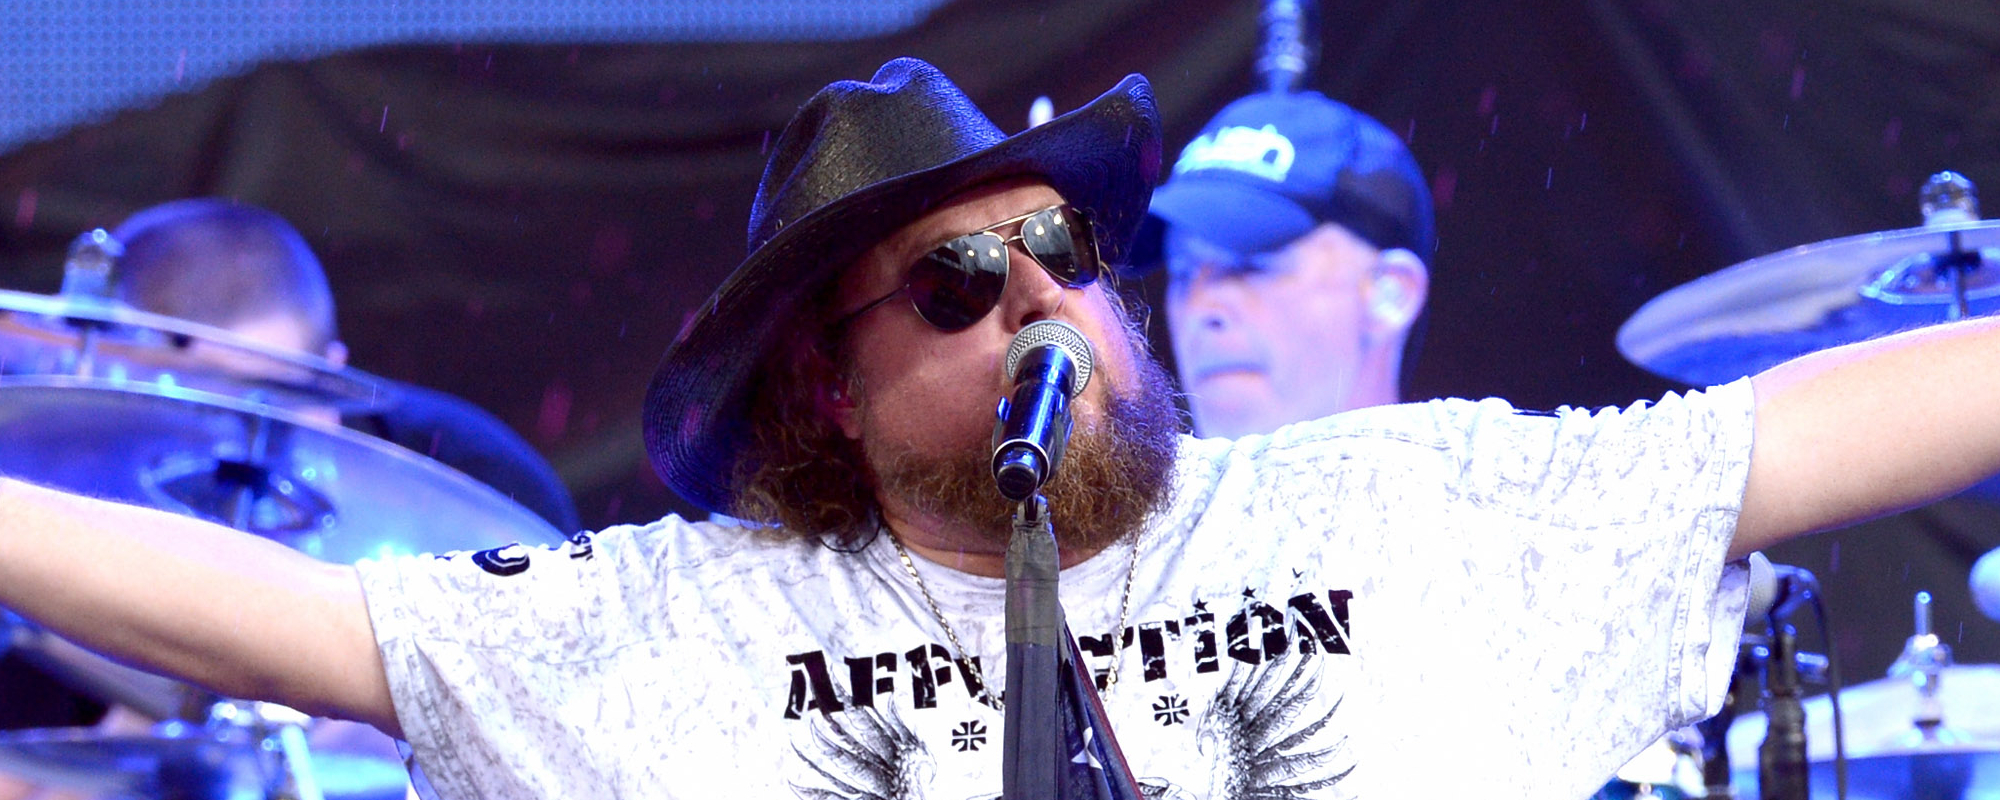 “Odds of Survival Were Grim,” Yet Colt Ford Continues To Progress After Heart Attack